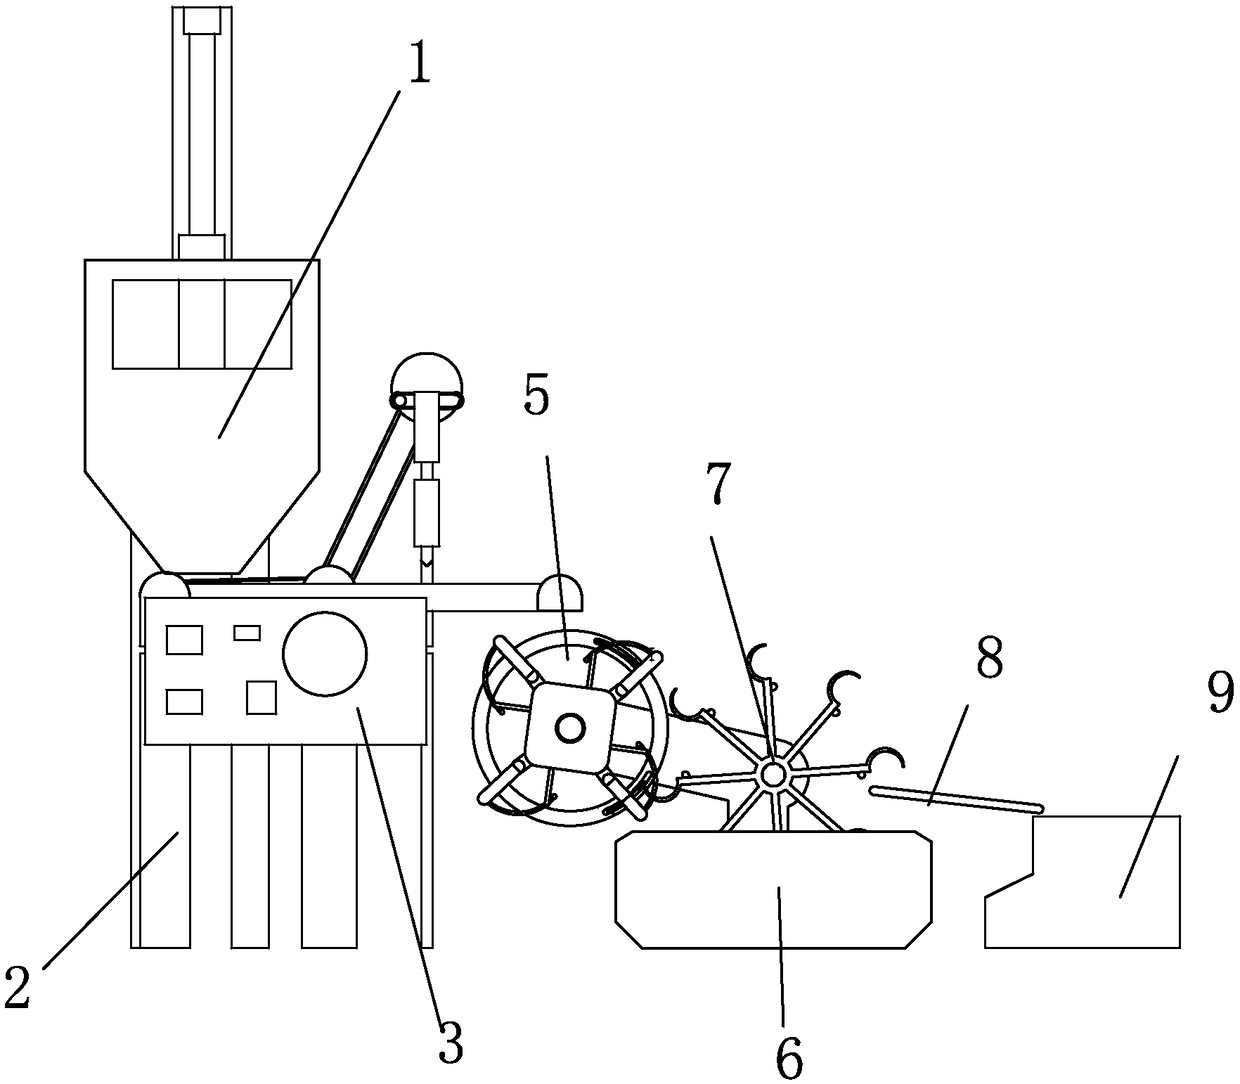 Oil-fried food production apparatus